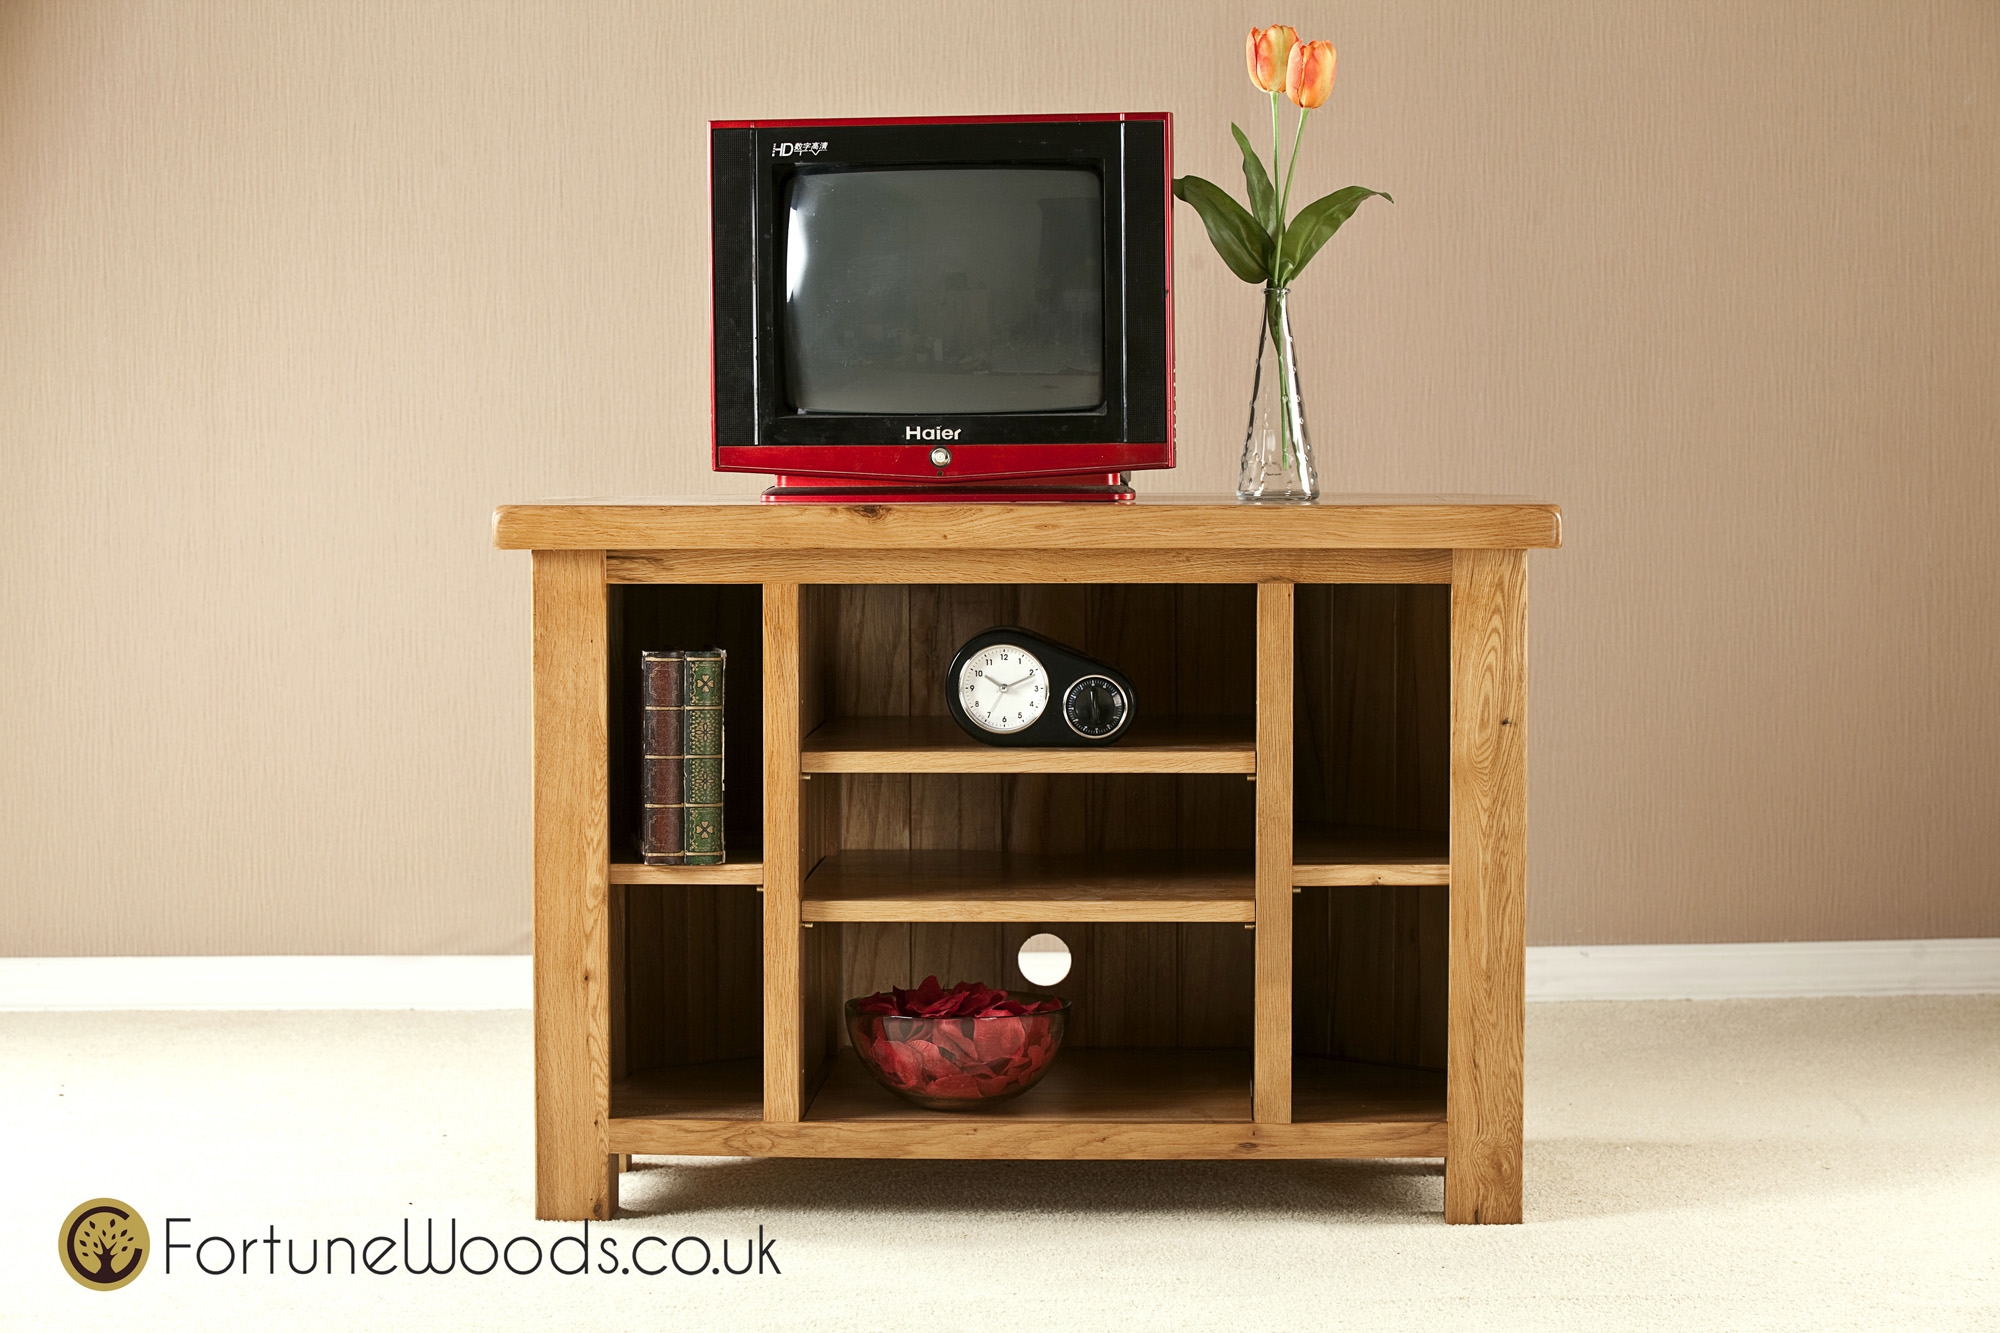 Fortune Woods Cotswold Corner Video Cabinet